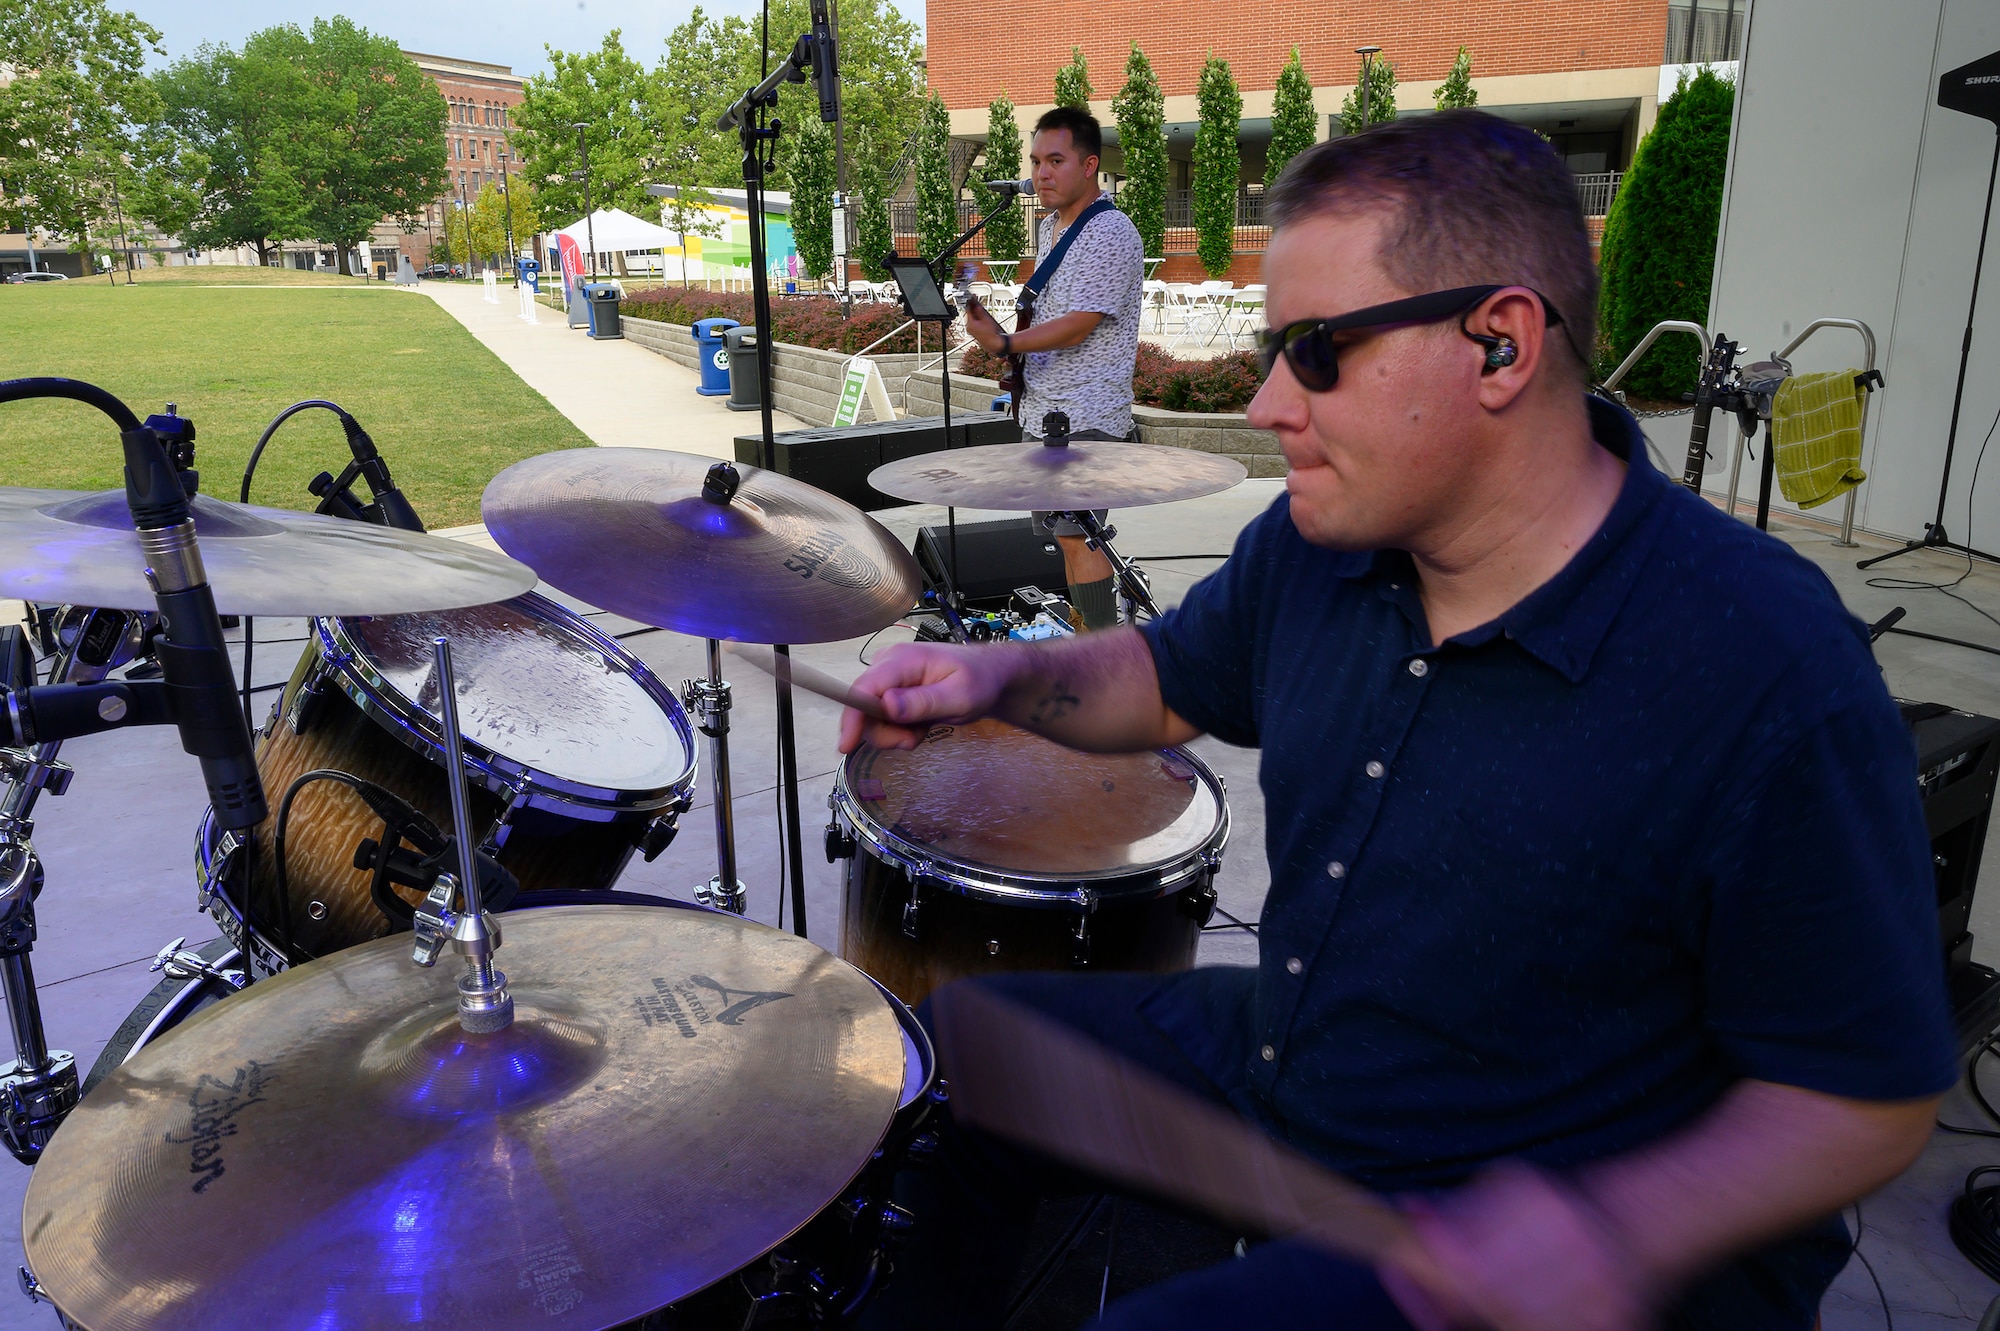 ech. Sgt. Andy Wendzikowski, drummer, and Airman 1st Class Christopher Arellano perform a sound check at Levitt Pavilion in Dayton, Ohio, on Aug. 7, 2021, prior to a scheduled performance of the Air Force Band of Flight’s rock ensemble Flight One. (U.S. Air Force photo by R.J. Oriez)